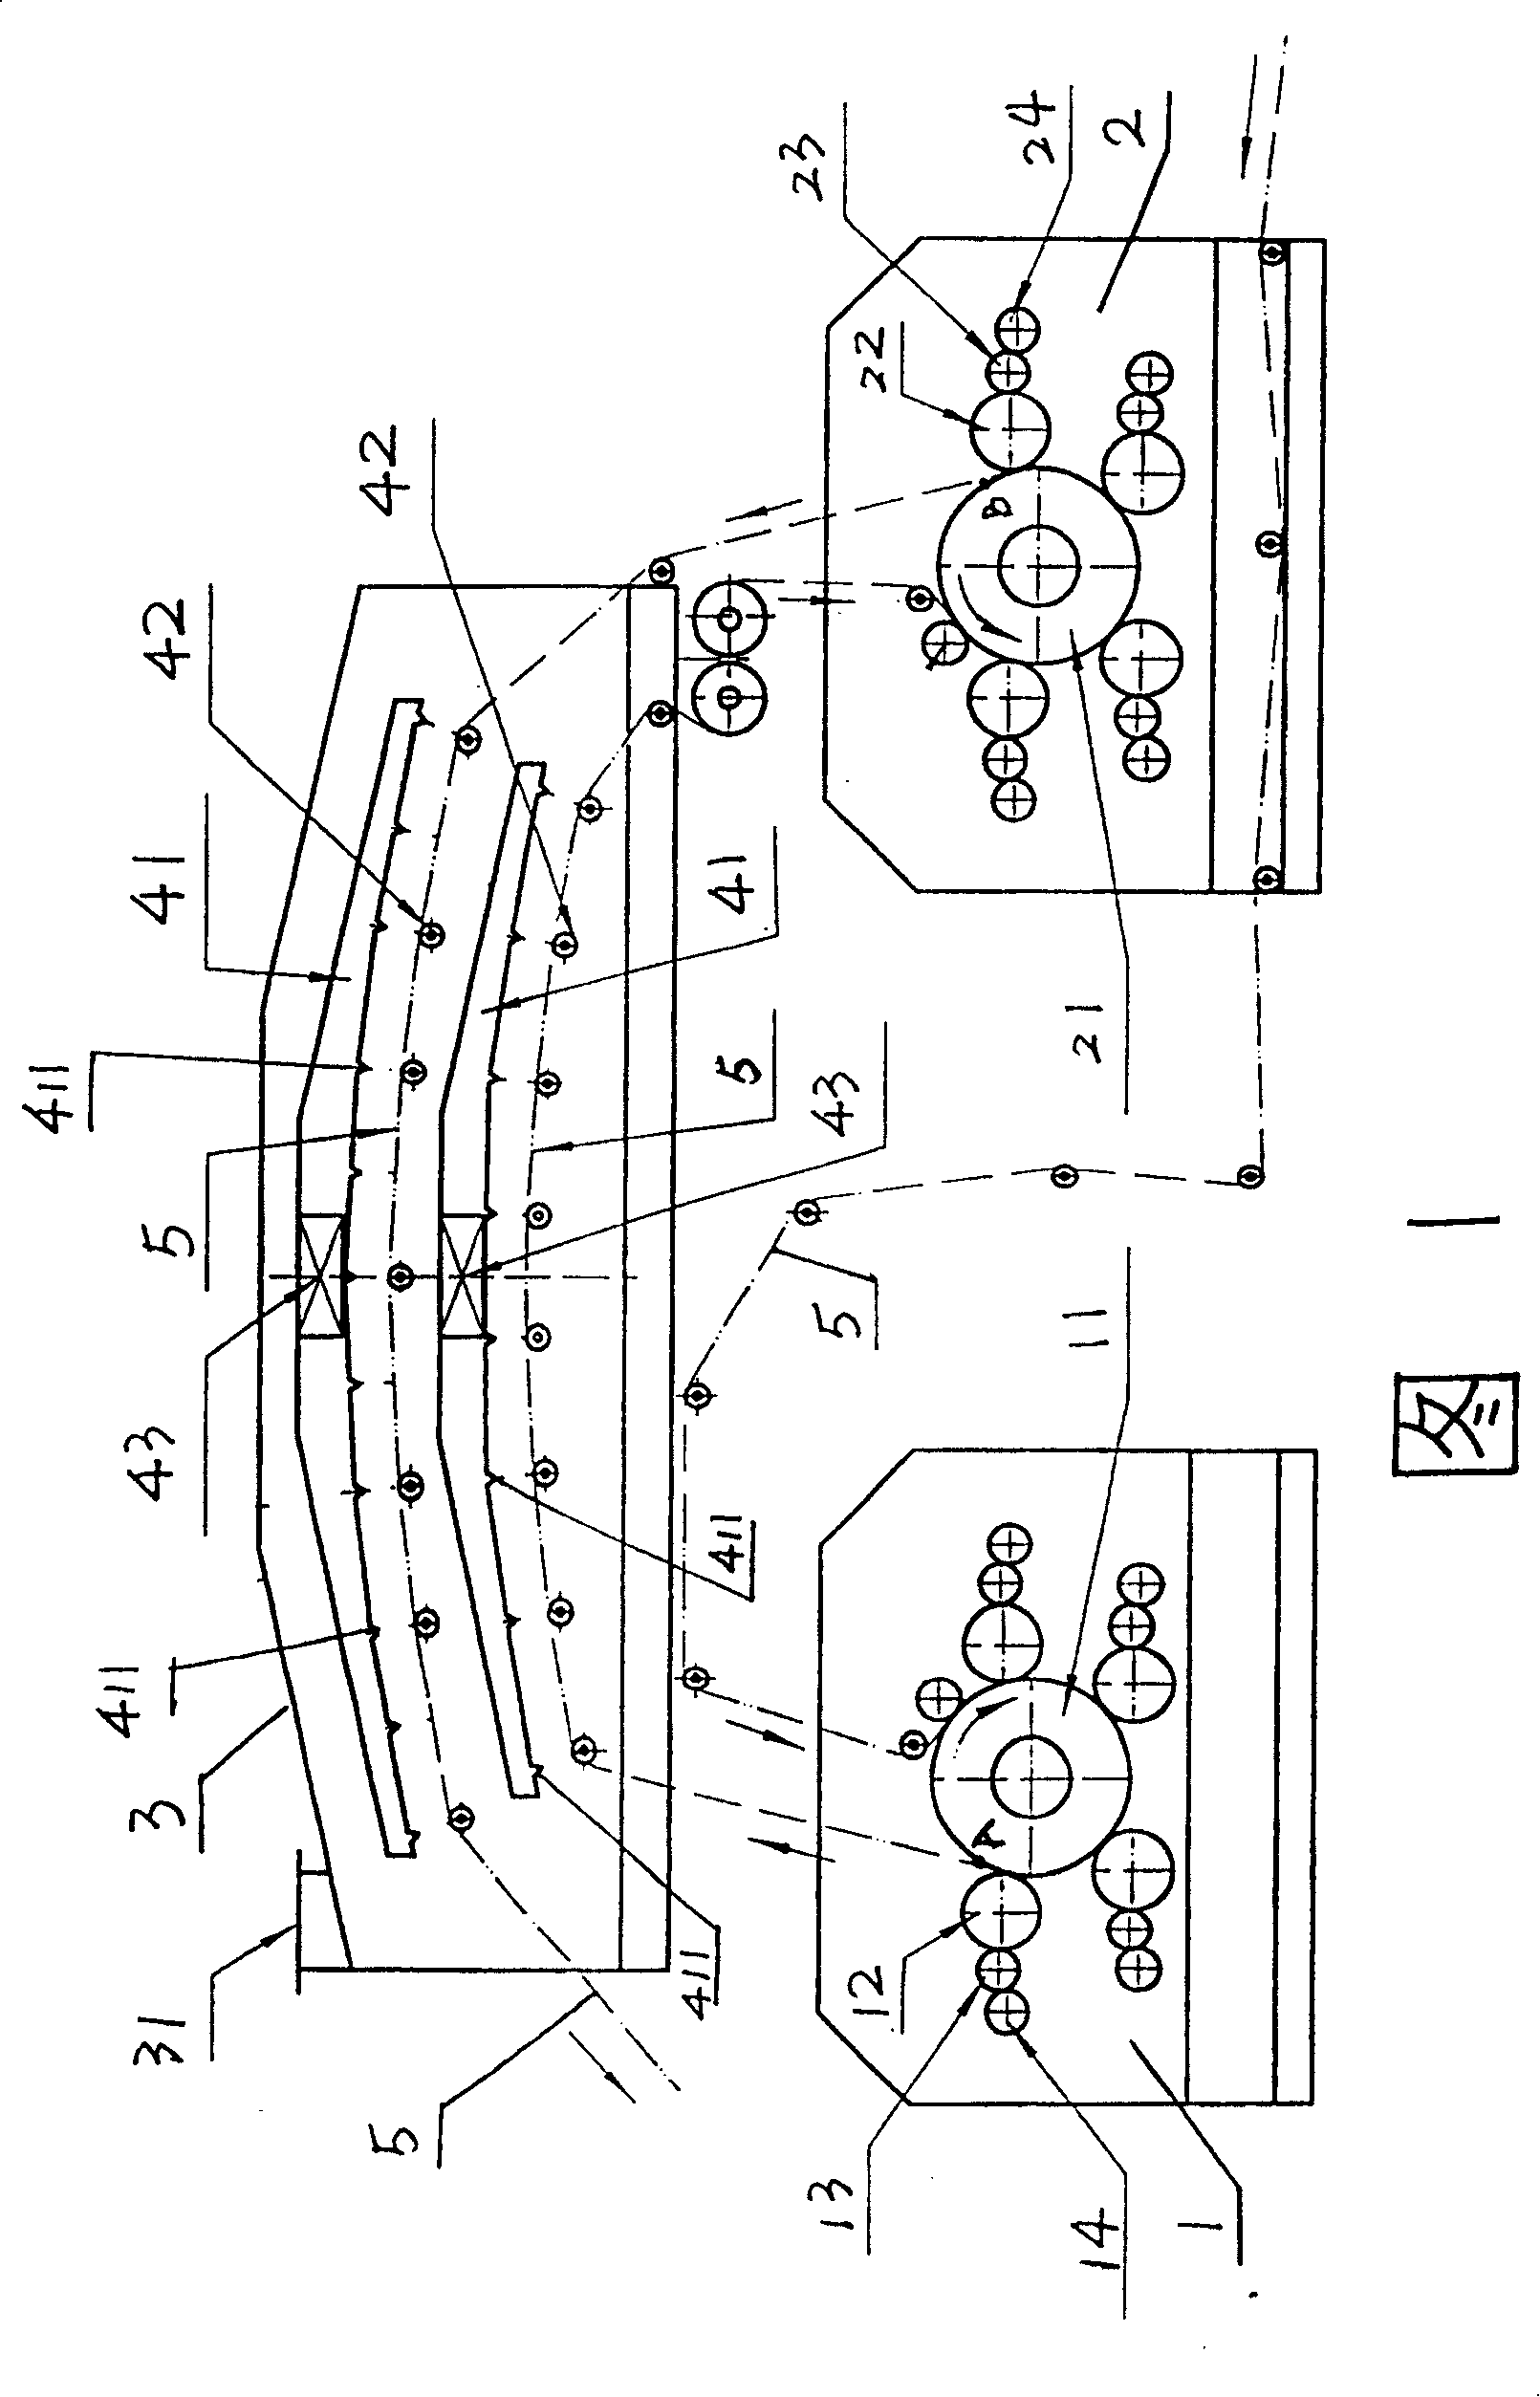 Double face printing apparatus and double face printing process